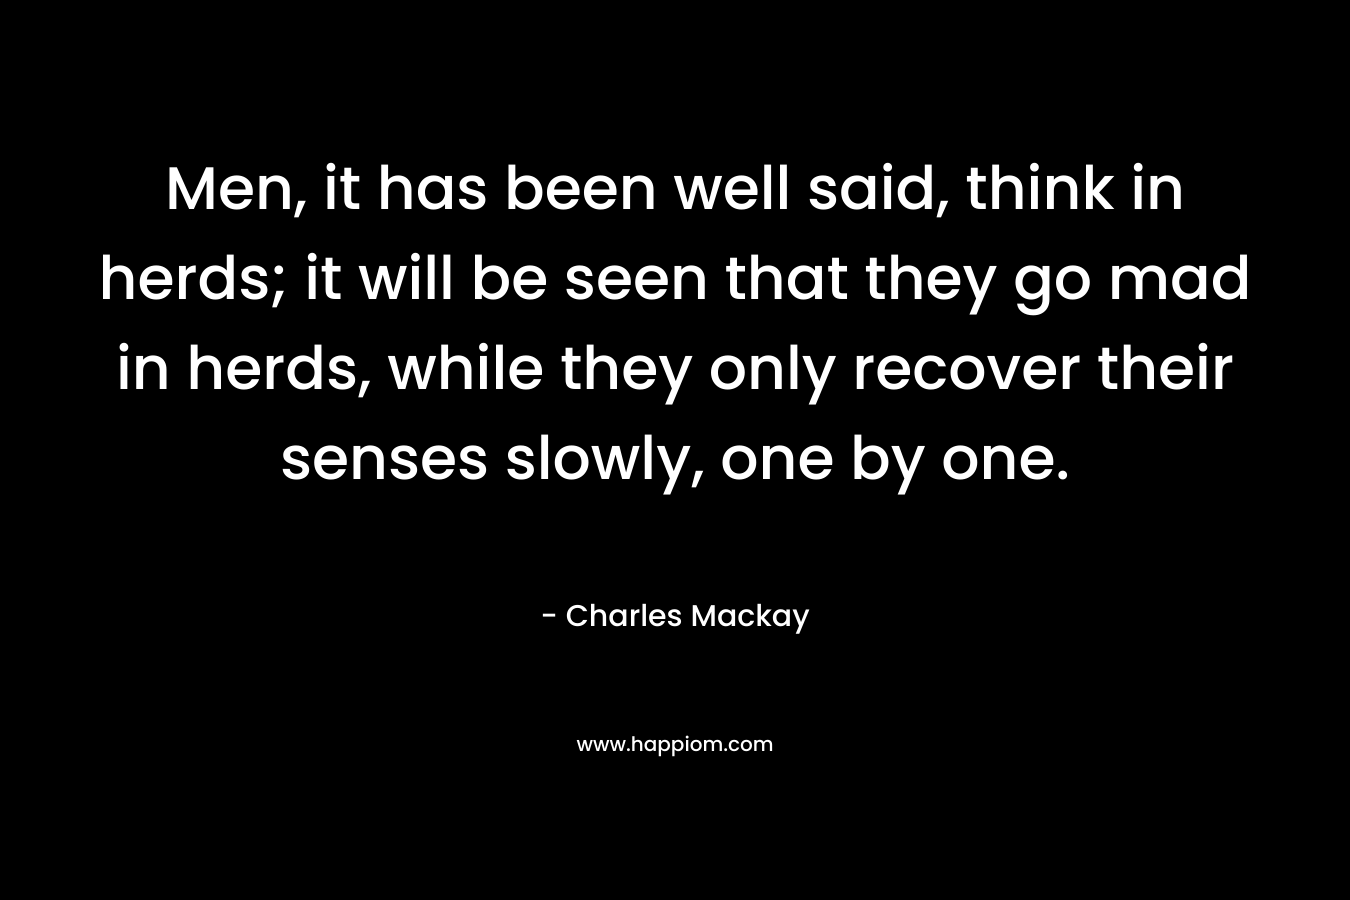 Men, it has been well said, think in herds; it will be seen that they go mad in herds, while they only recover their senses slowly, one by one. – Charles Mackay